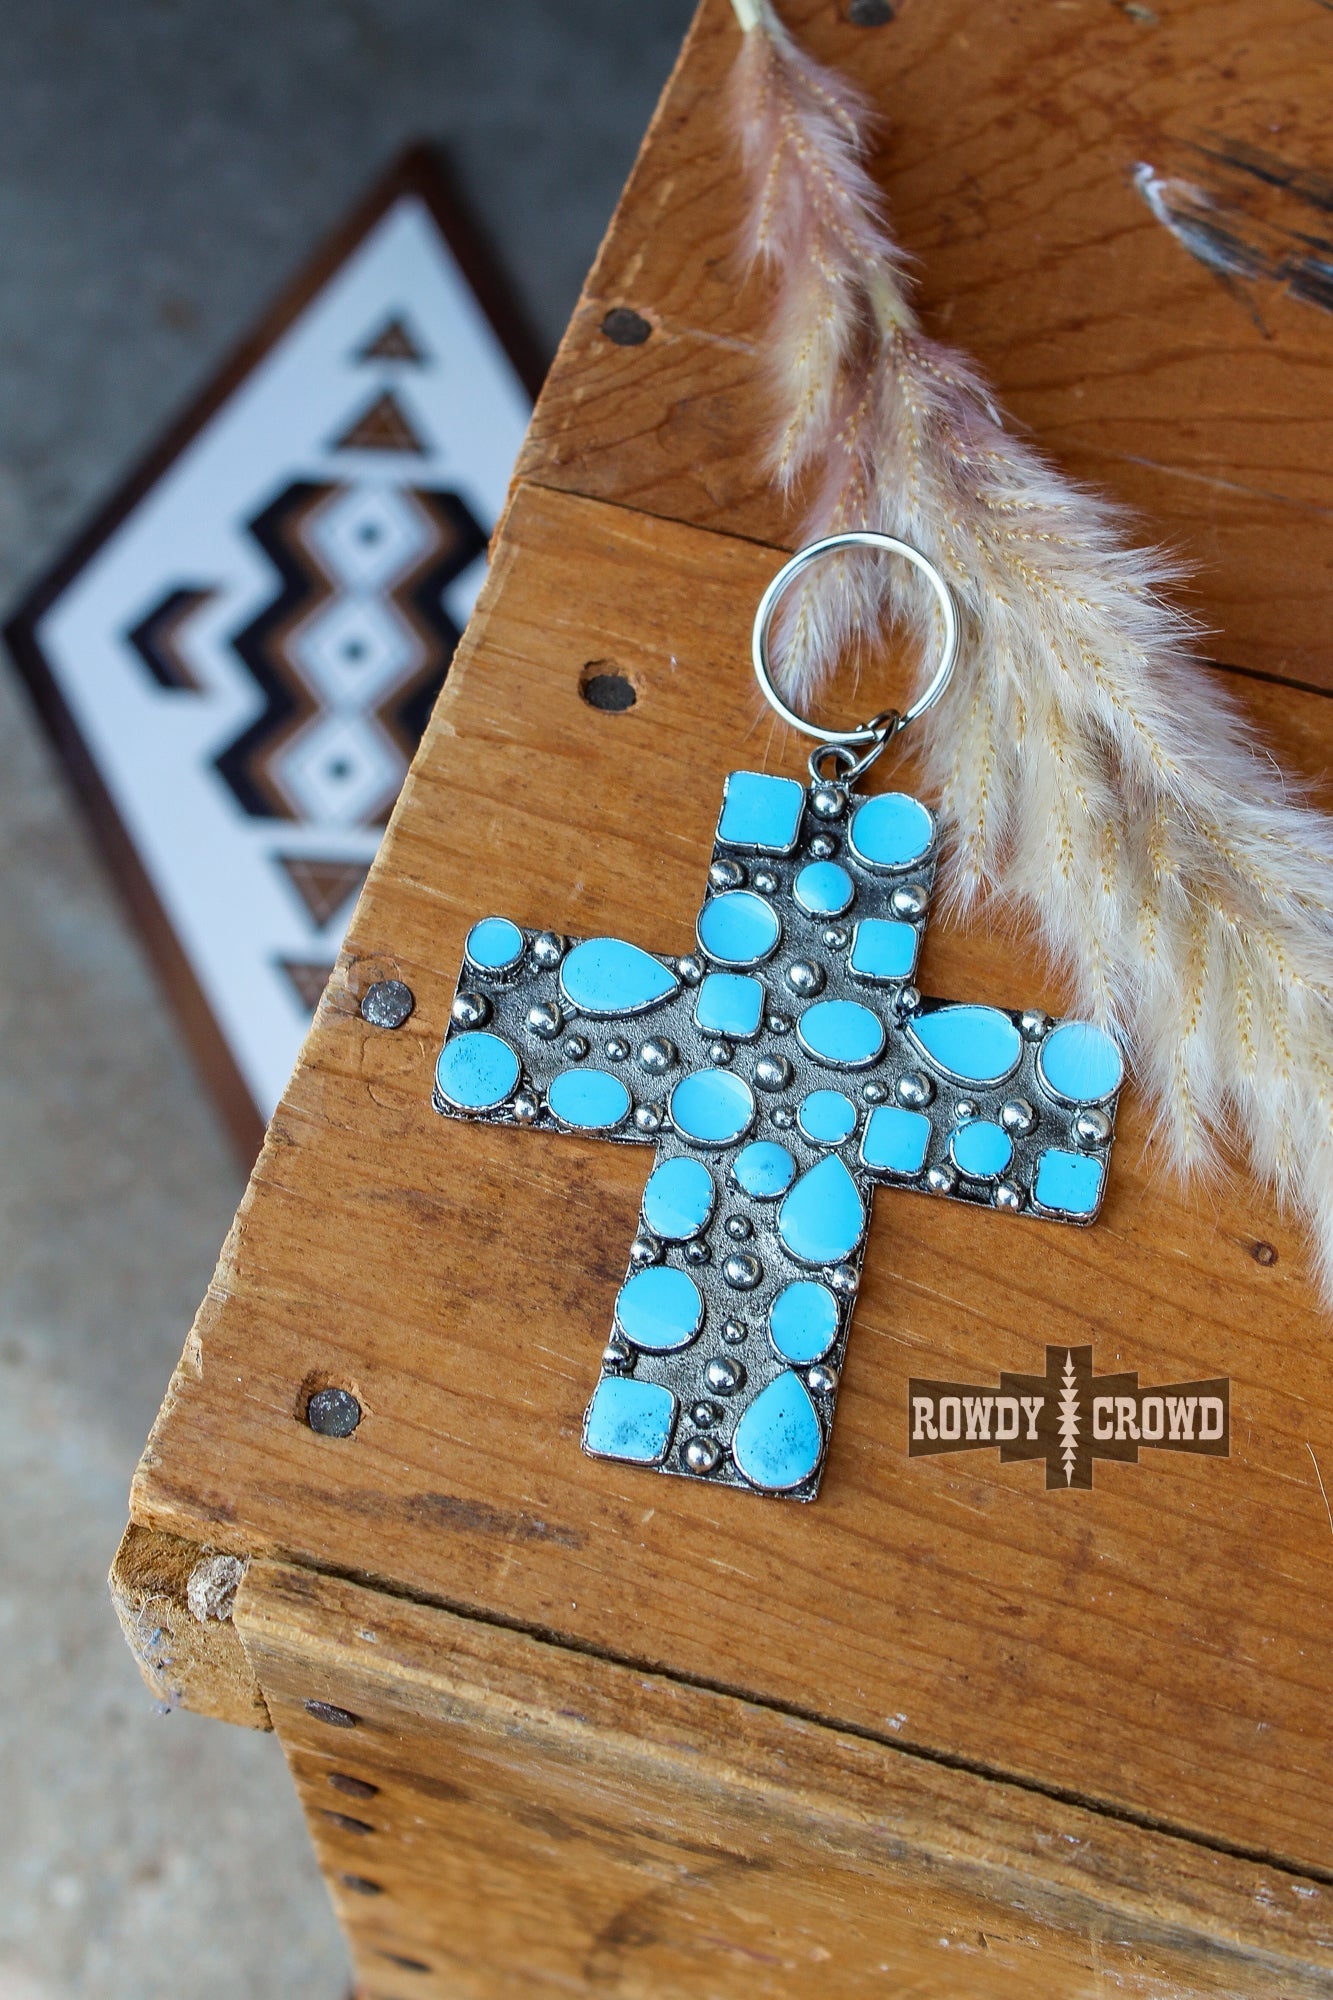 western accessories, western keychains, western key chain, cowgirl keychain, western key rings, western style keychains, wholesale clothing and jewelry, wholesale accessories, western wholesale, western cross, western cross keychain, turquoise cross keychain, cross keychain